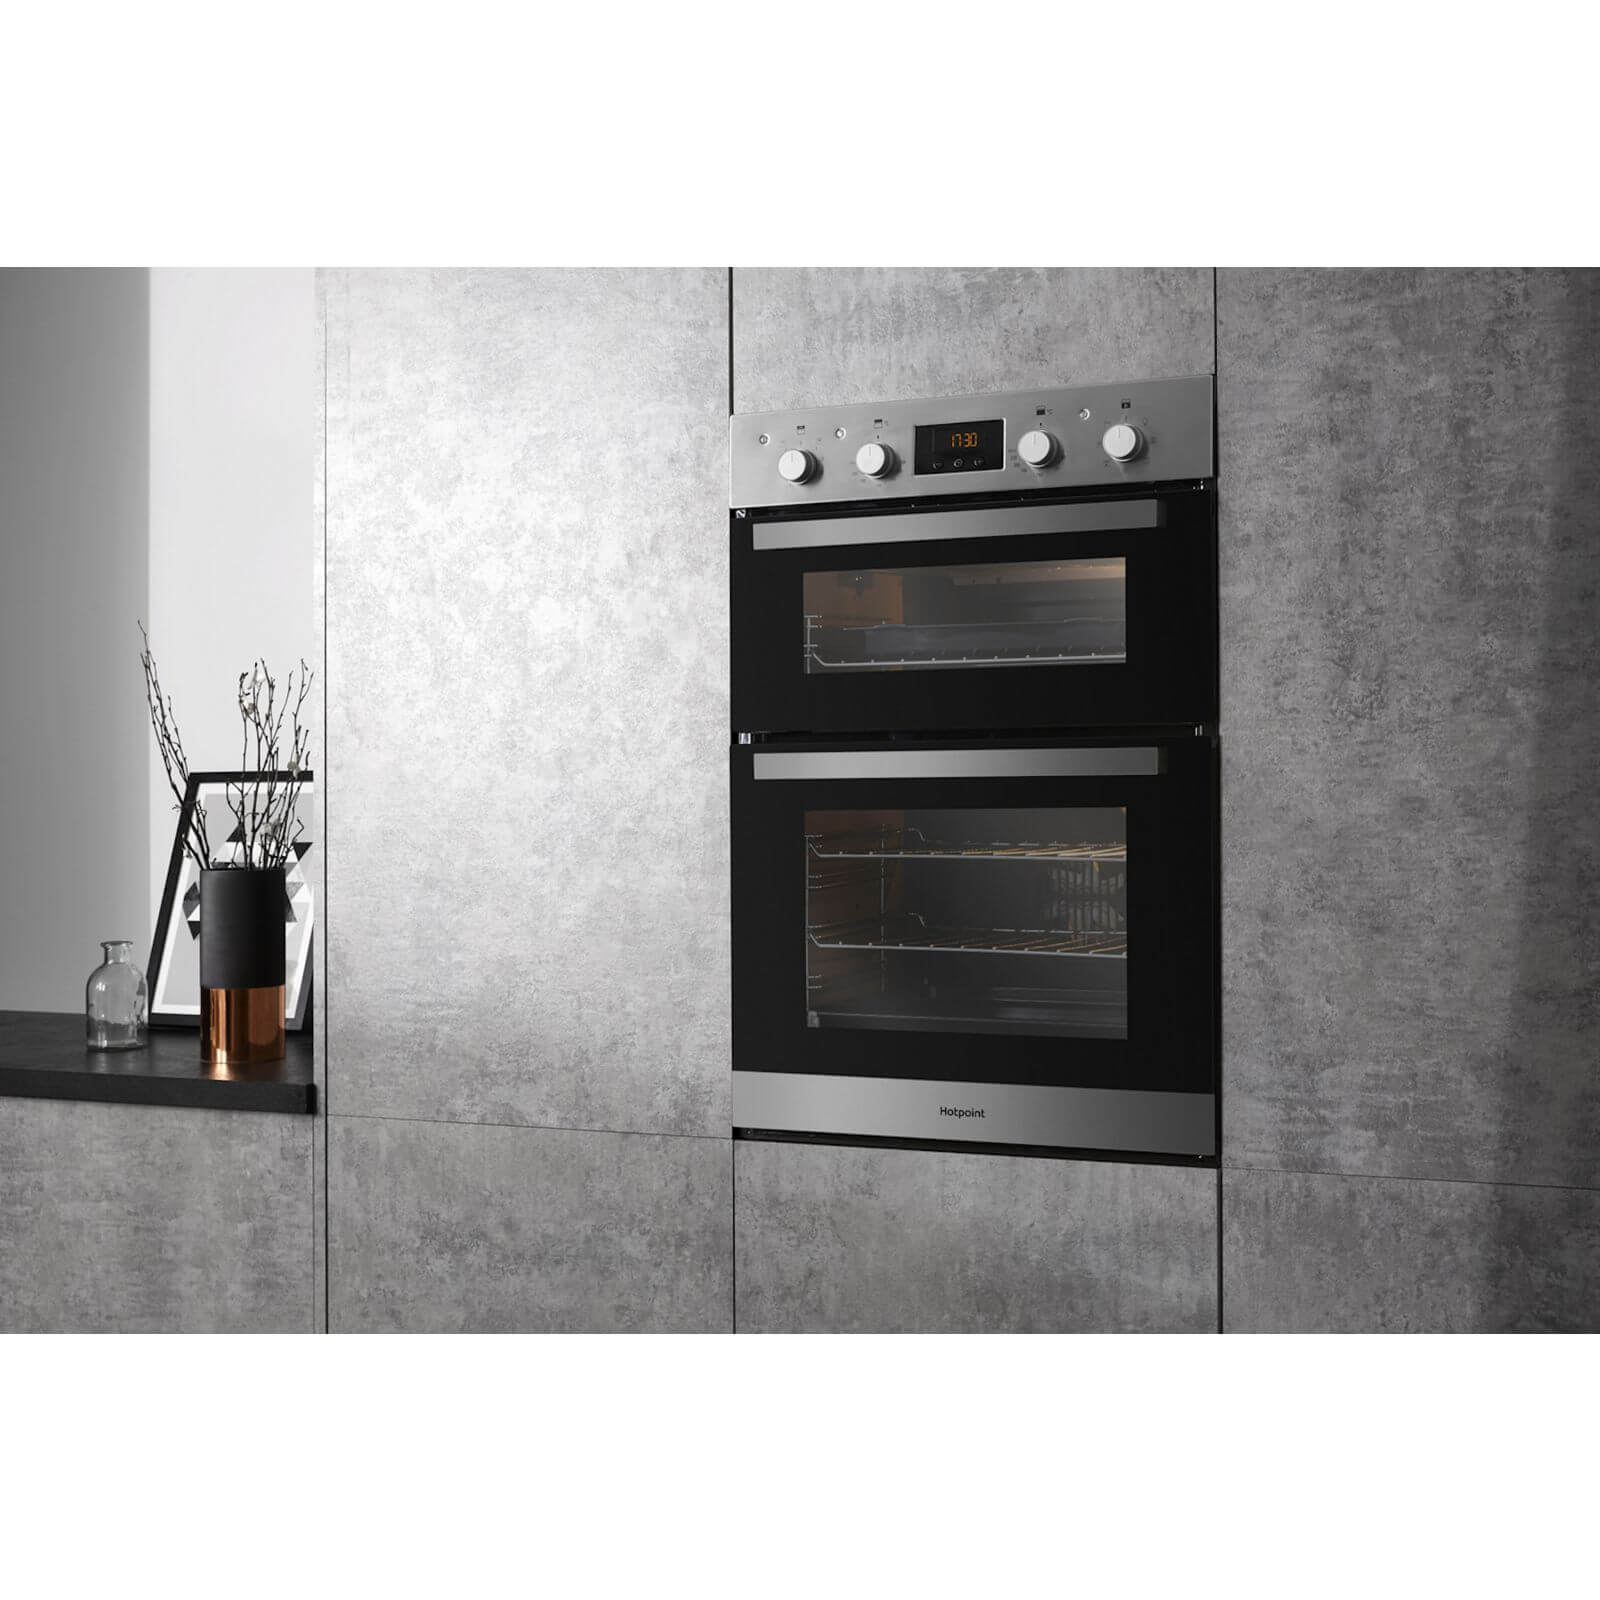 Hotpoint Class 3 DKD3 841 IX Built-in Double Electric Oven - Stainless Steel